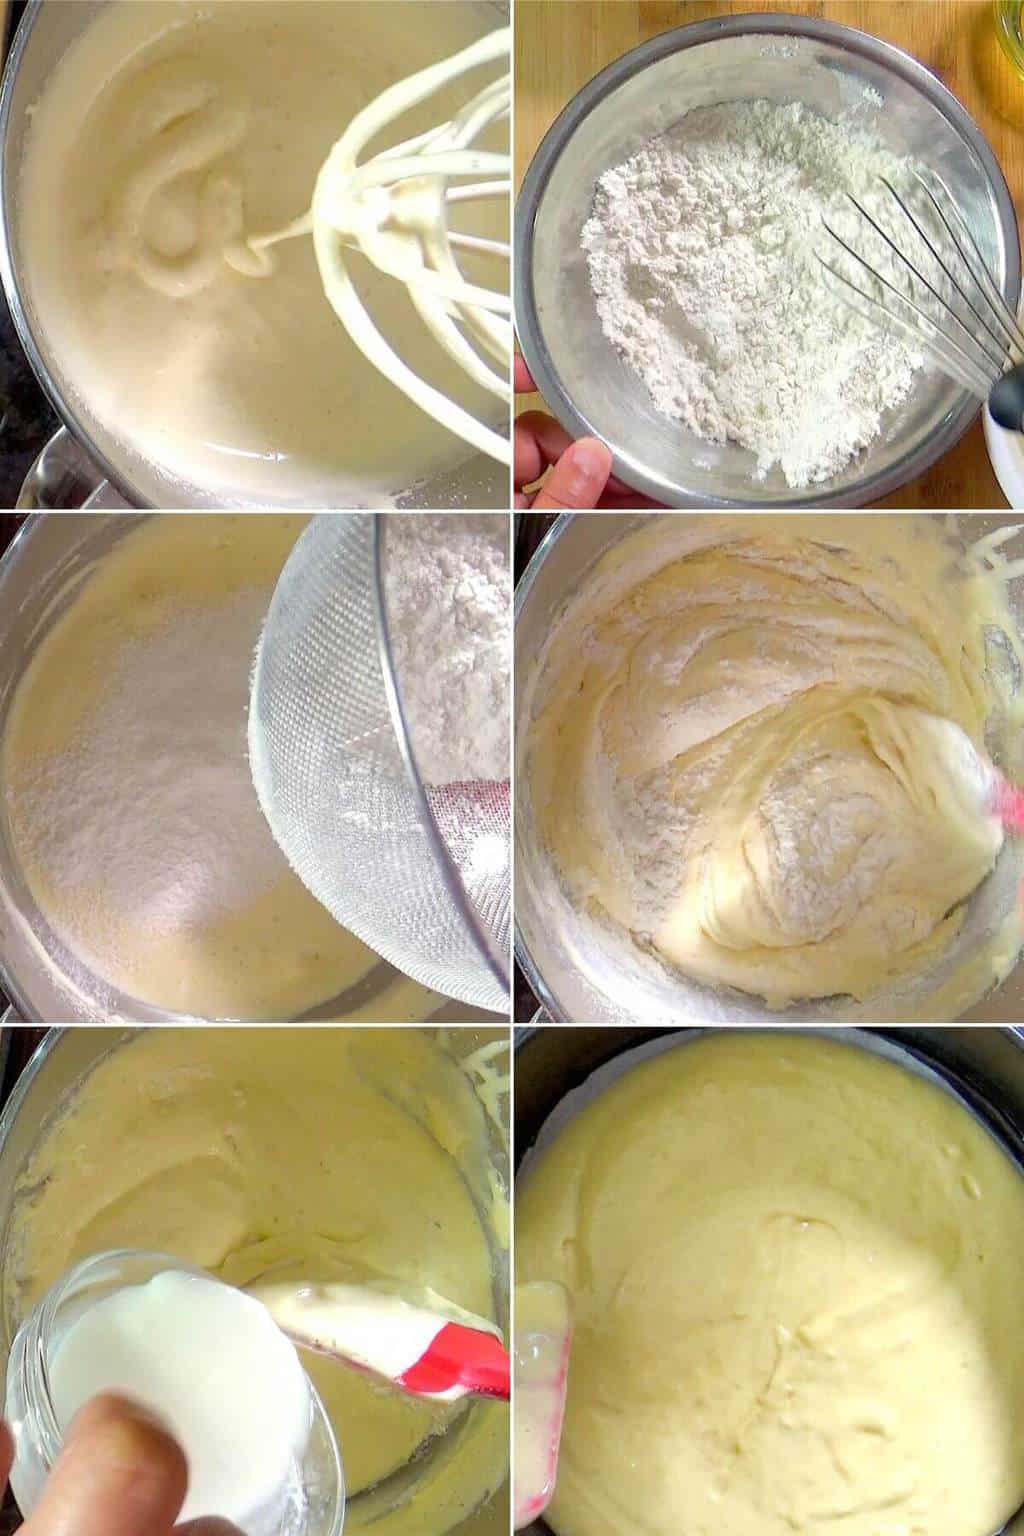 Step by step process for making the plain cake.